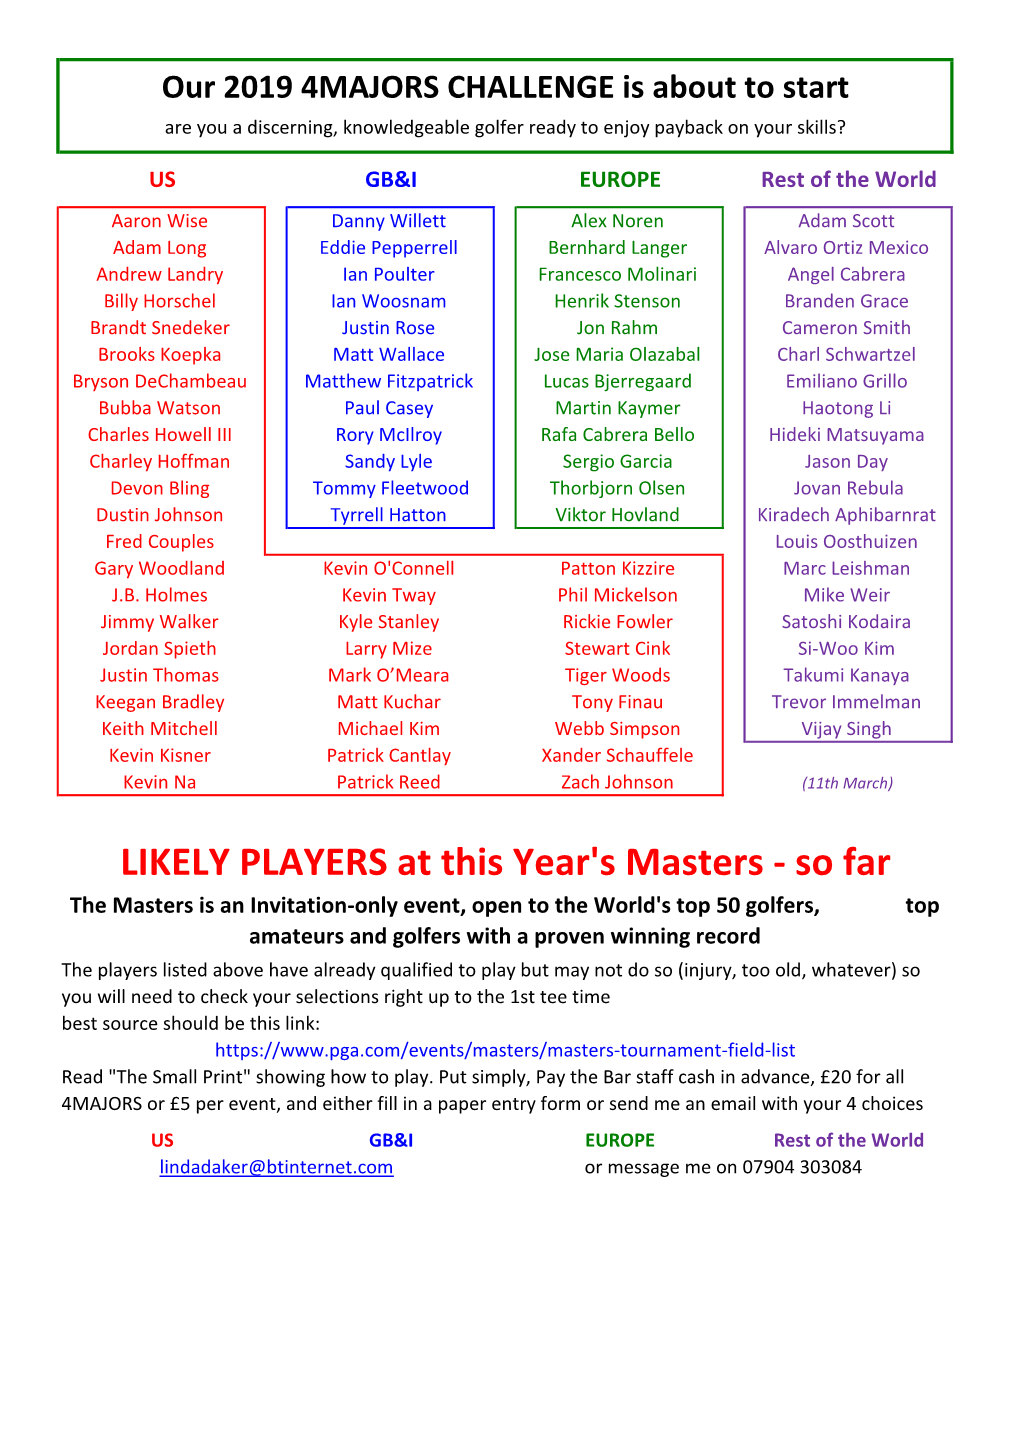 LIKELY PLAYERS at This Year's Masters